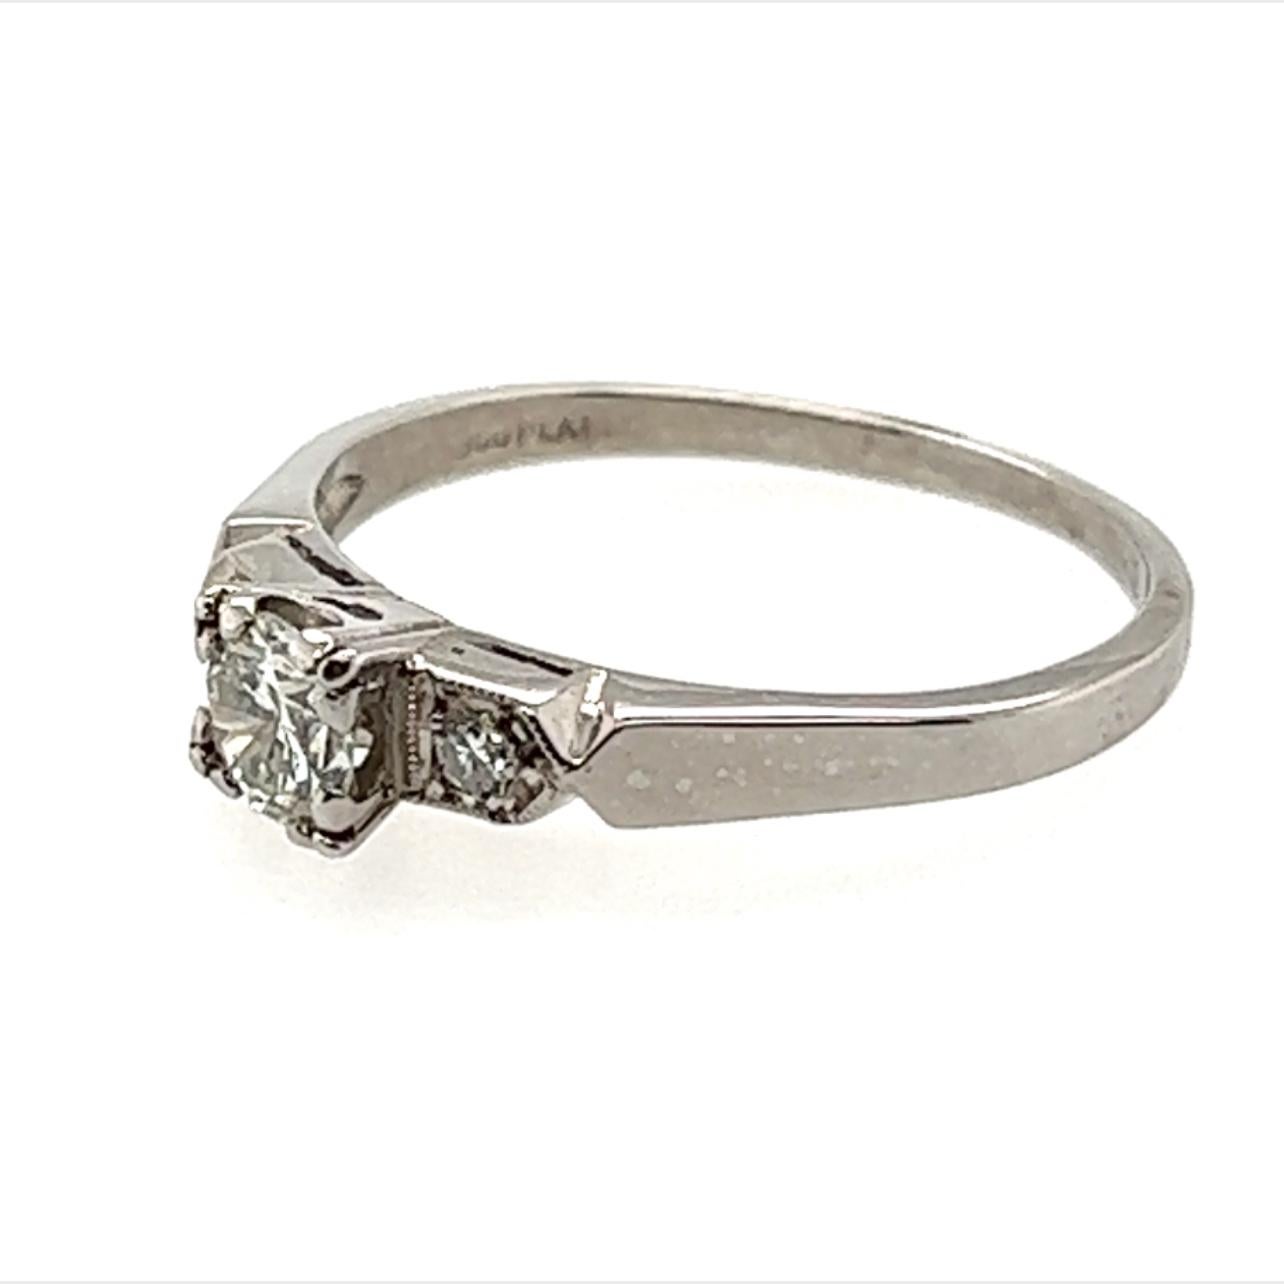 Genuine Original Art Deco Antique from 1930's -1940's Vintage Diamond Engagement Ring .46ct I/SI1 Platinum


Featuring a Bright and Shining .40ct I/SI1 Genuine Round Brilliant Cut Natural Mined Diamond Center

Hand Engraving, and Delicate Milgrain